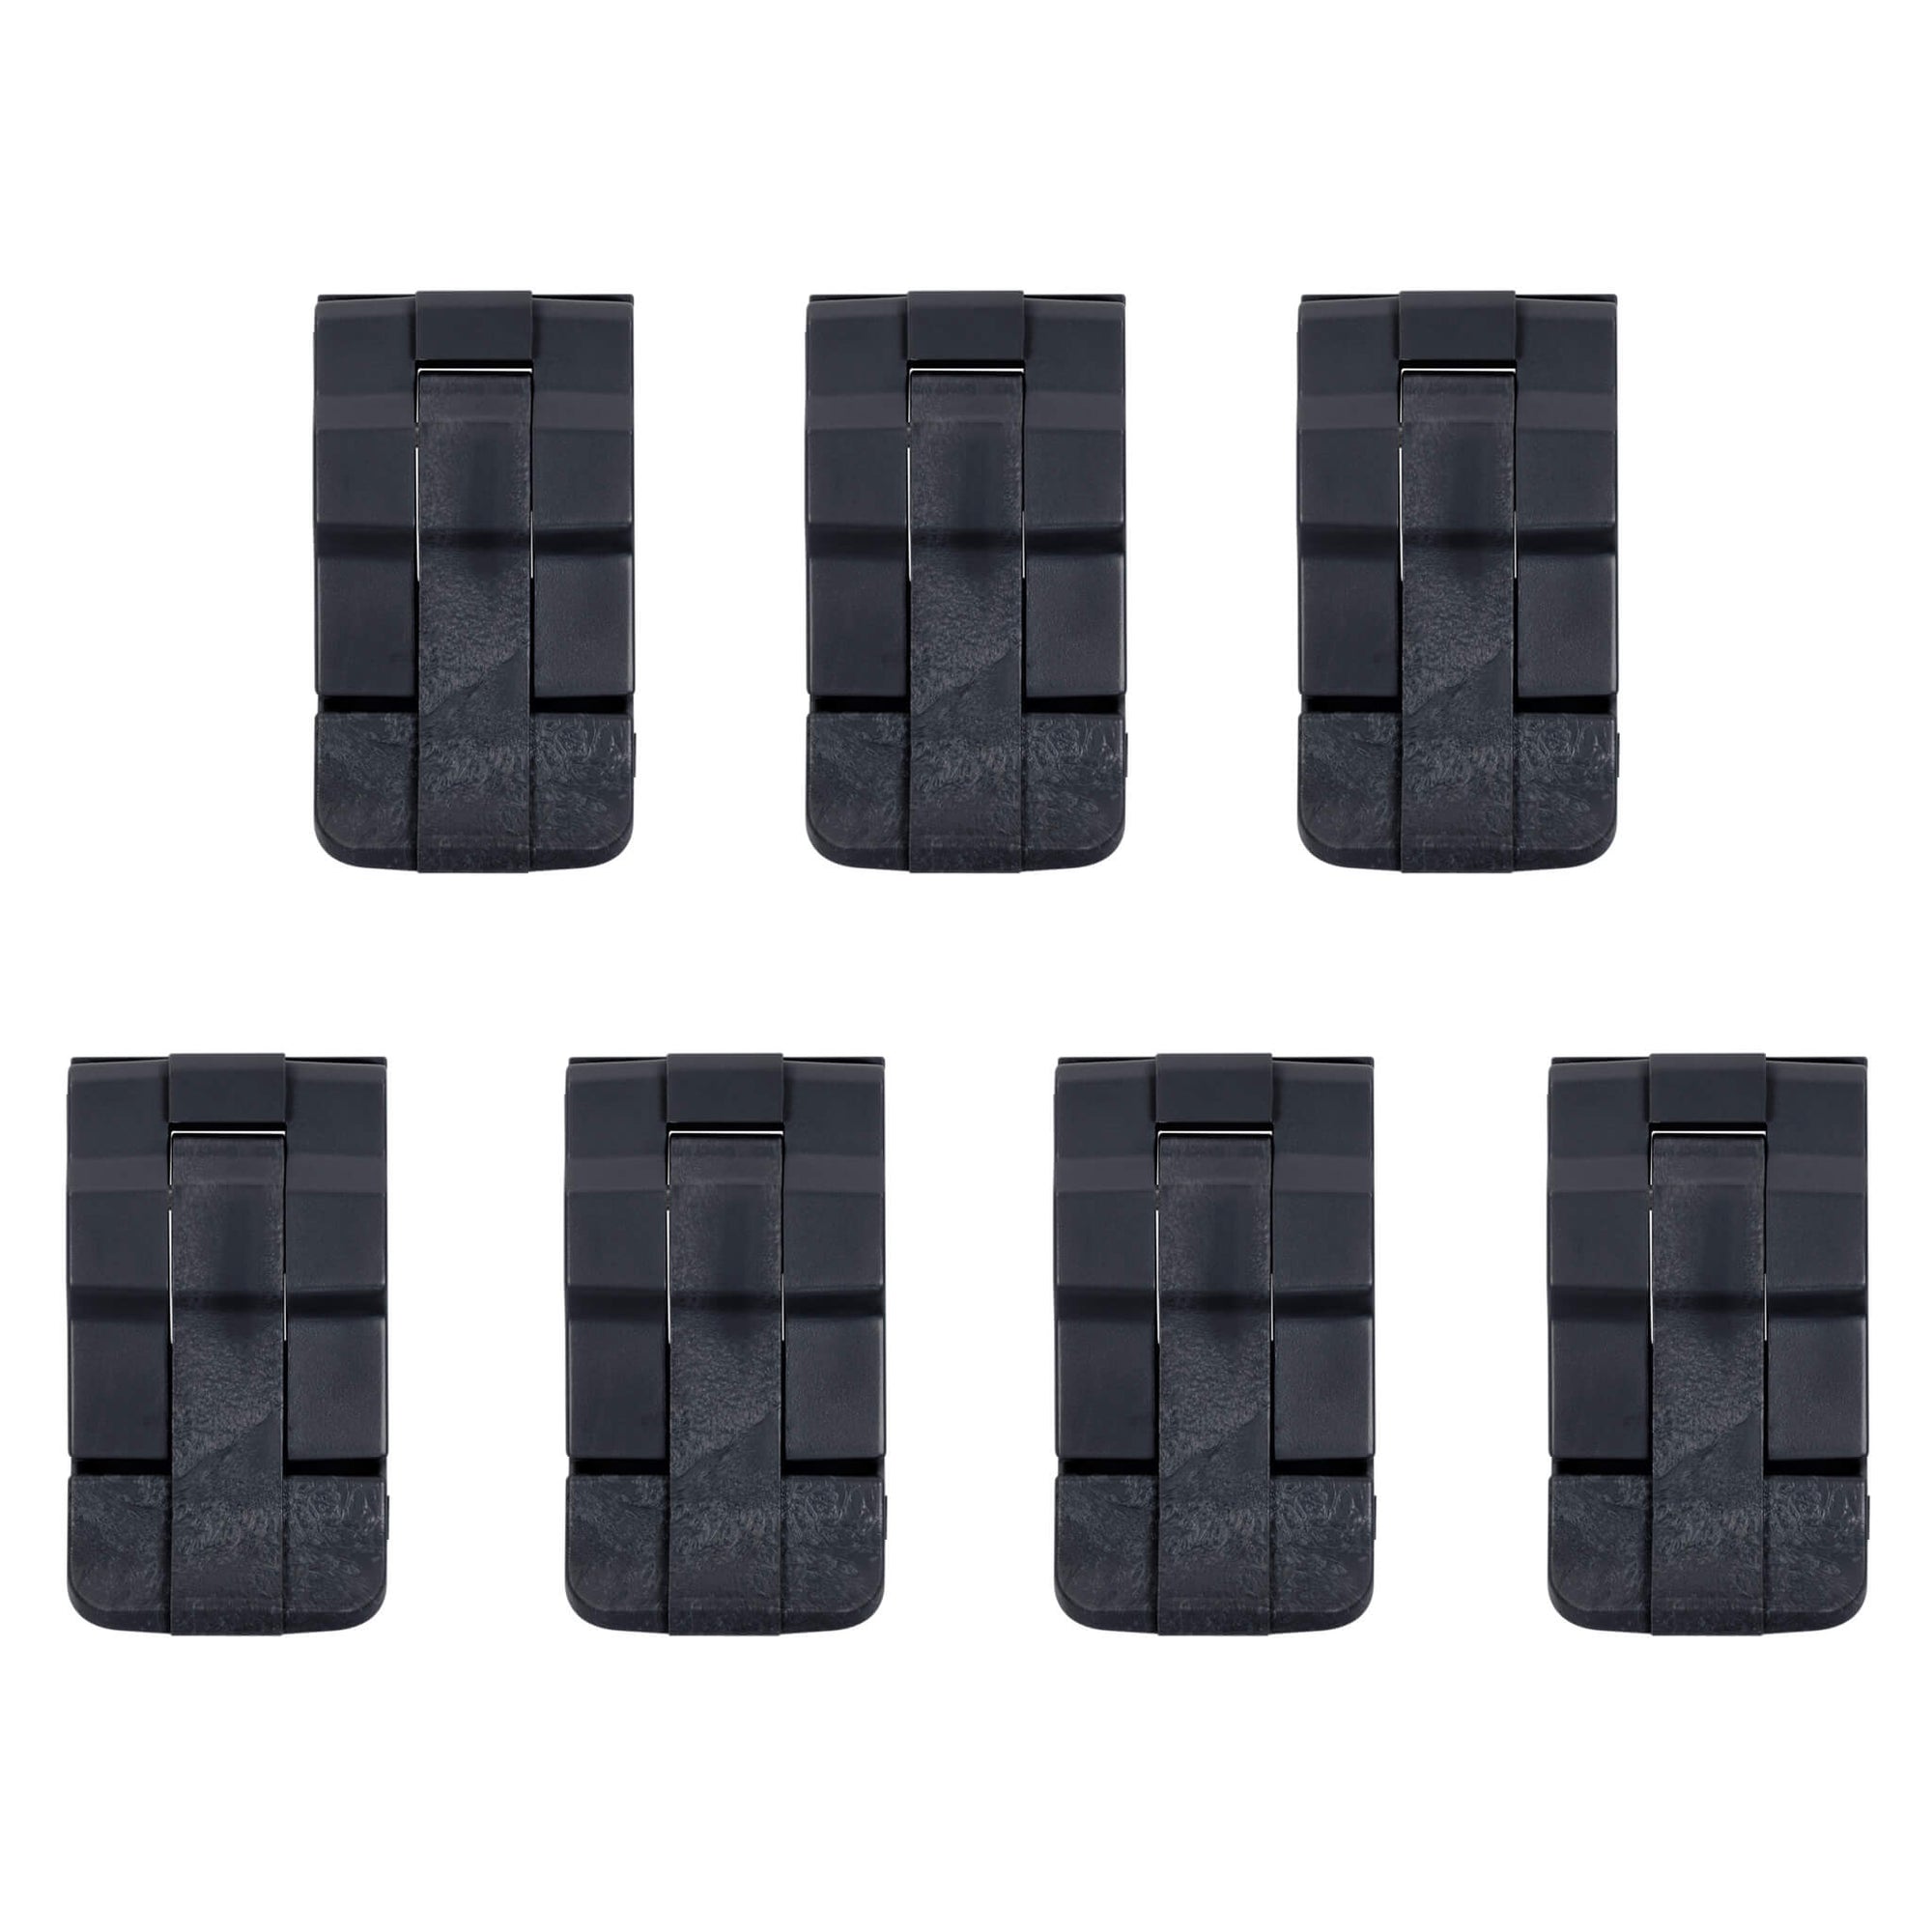 Pelican 1630 Replacement Latches, Black (Set of 7) ColorCase 